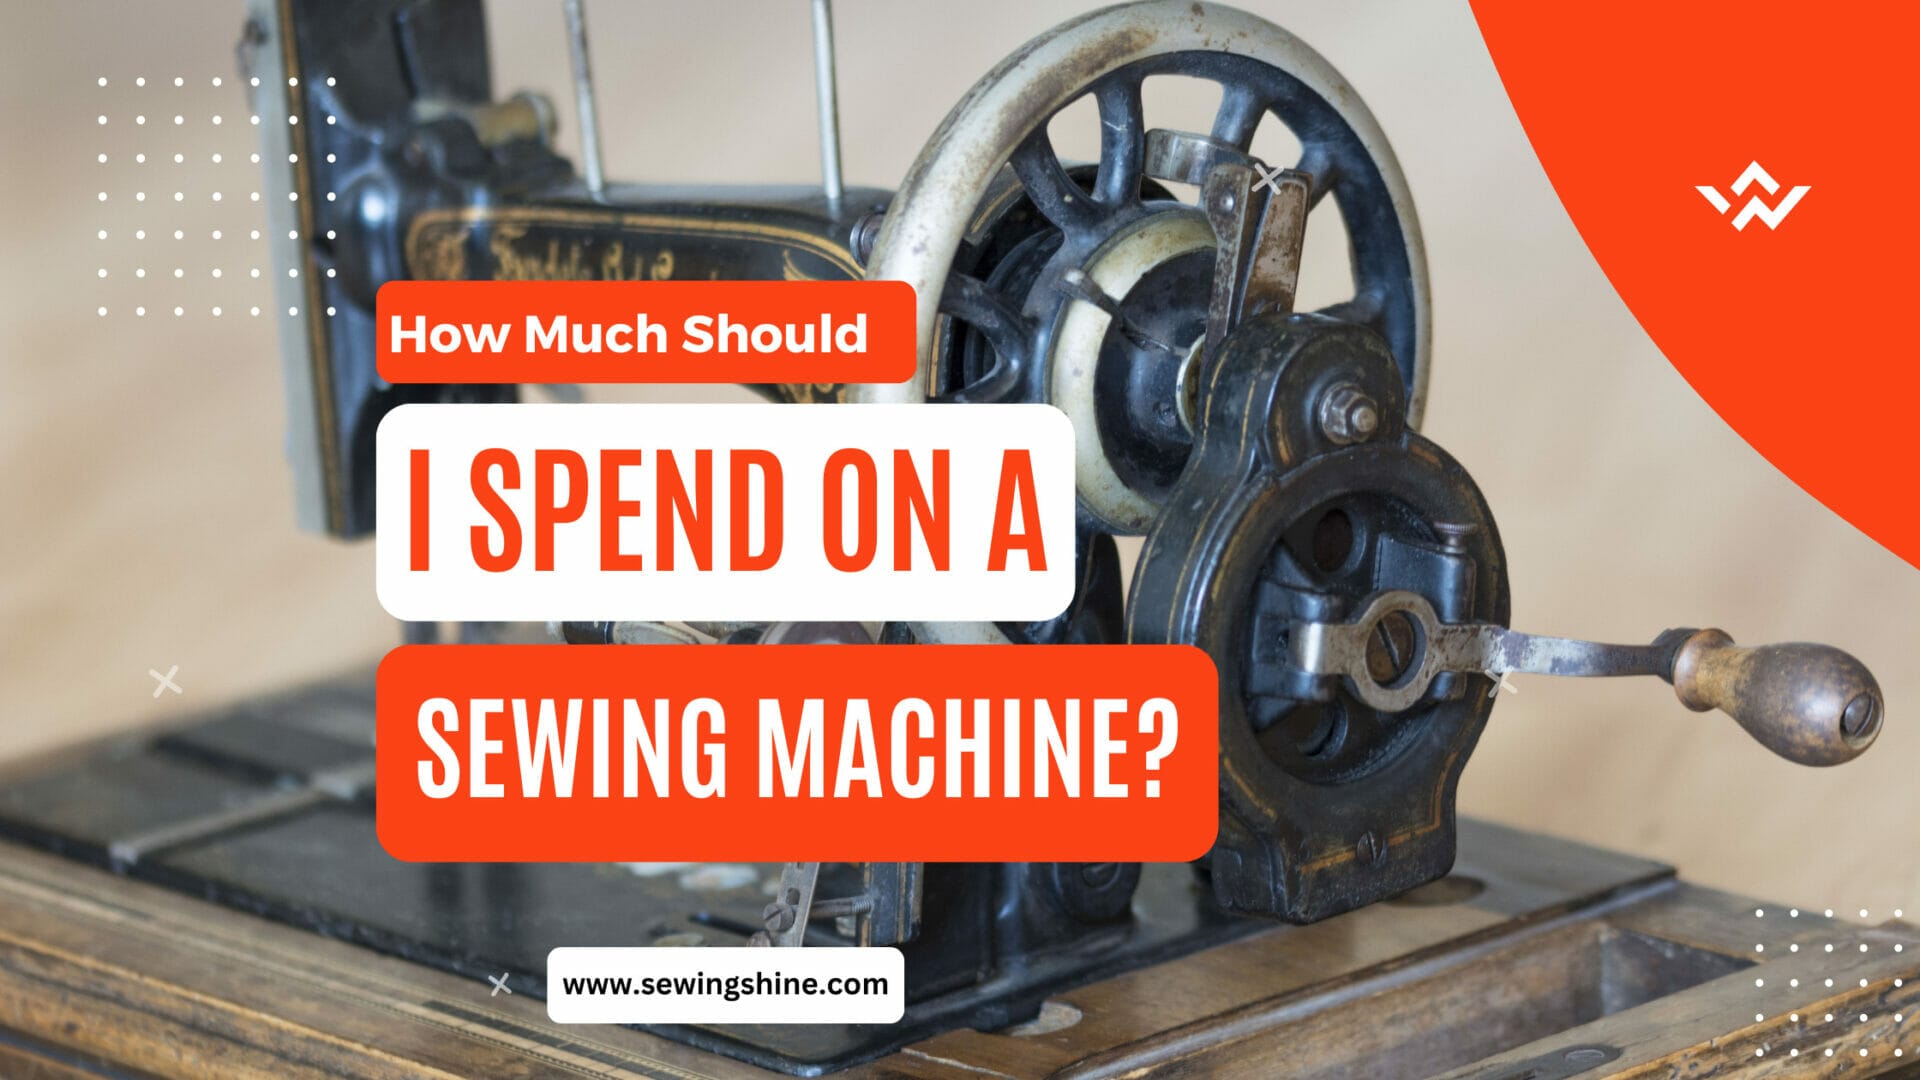 How Much Should I Spend On A Sewing Machine